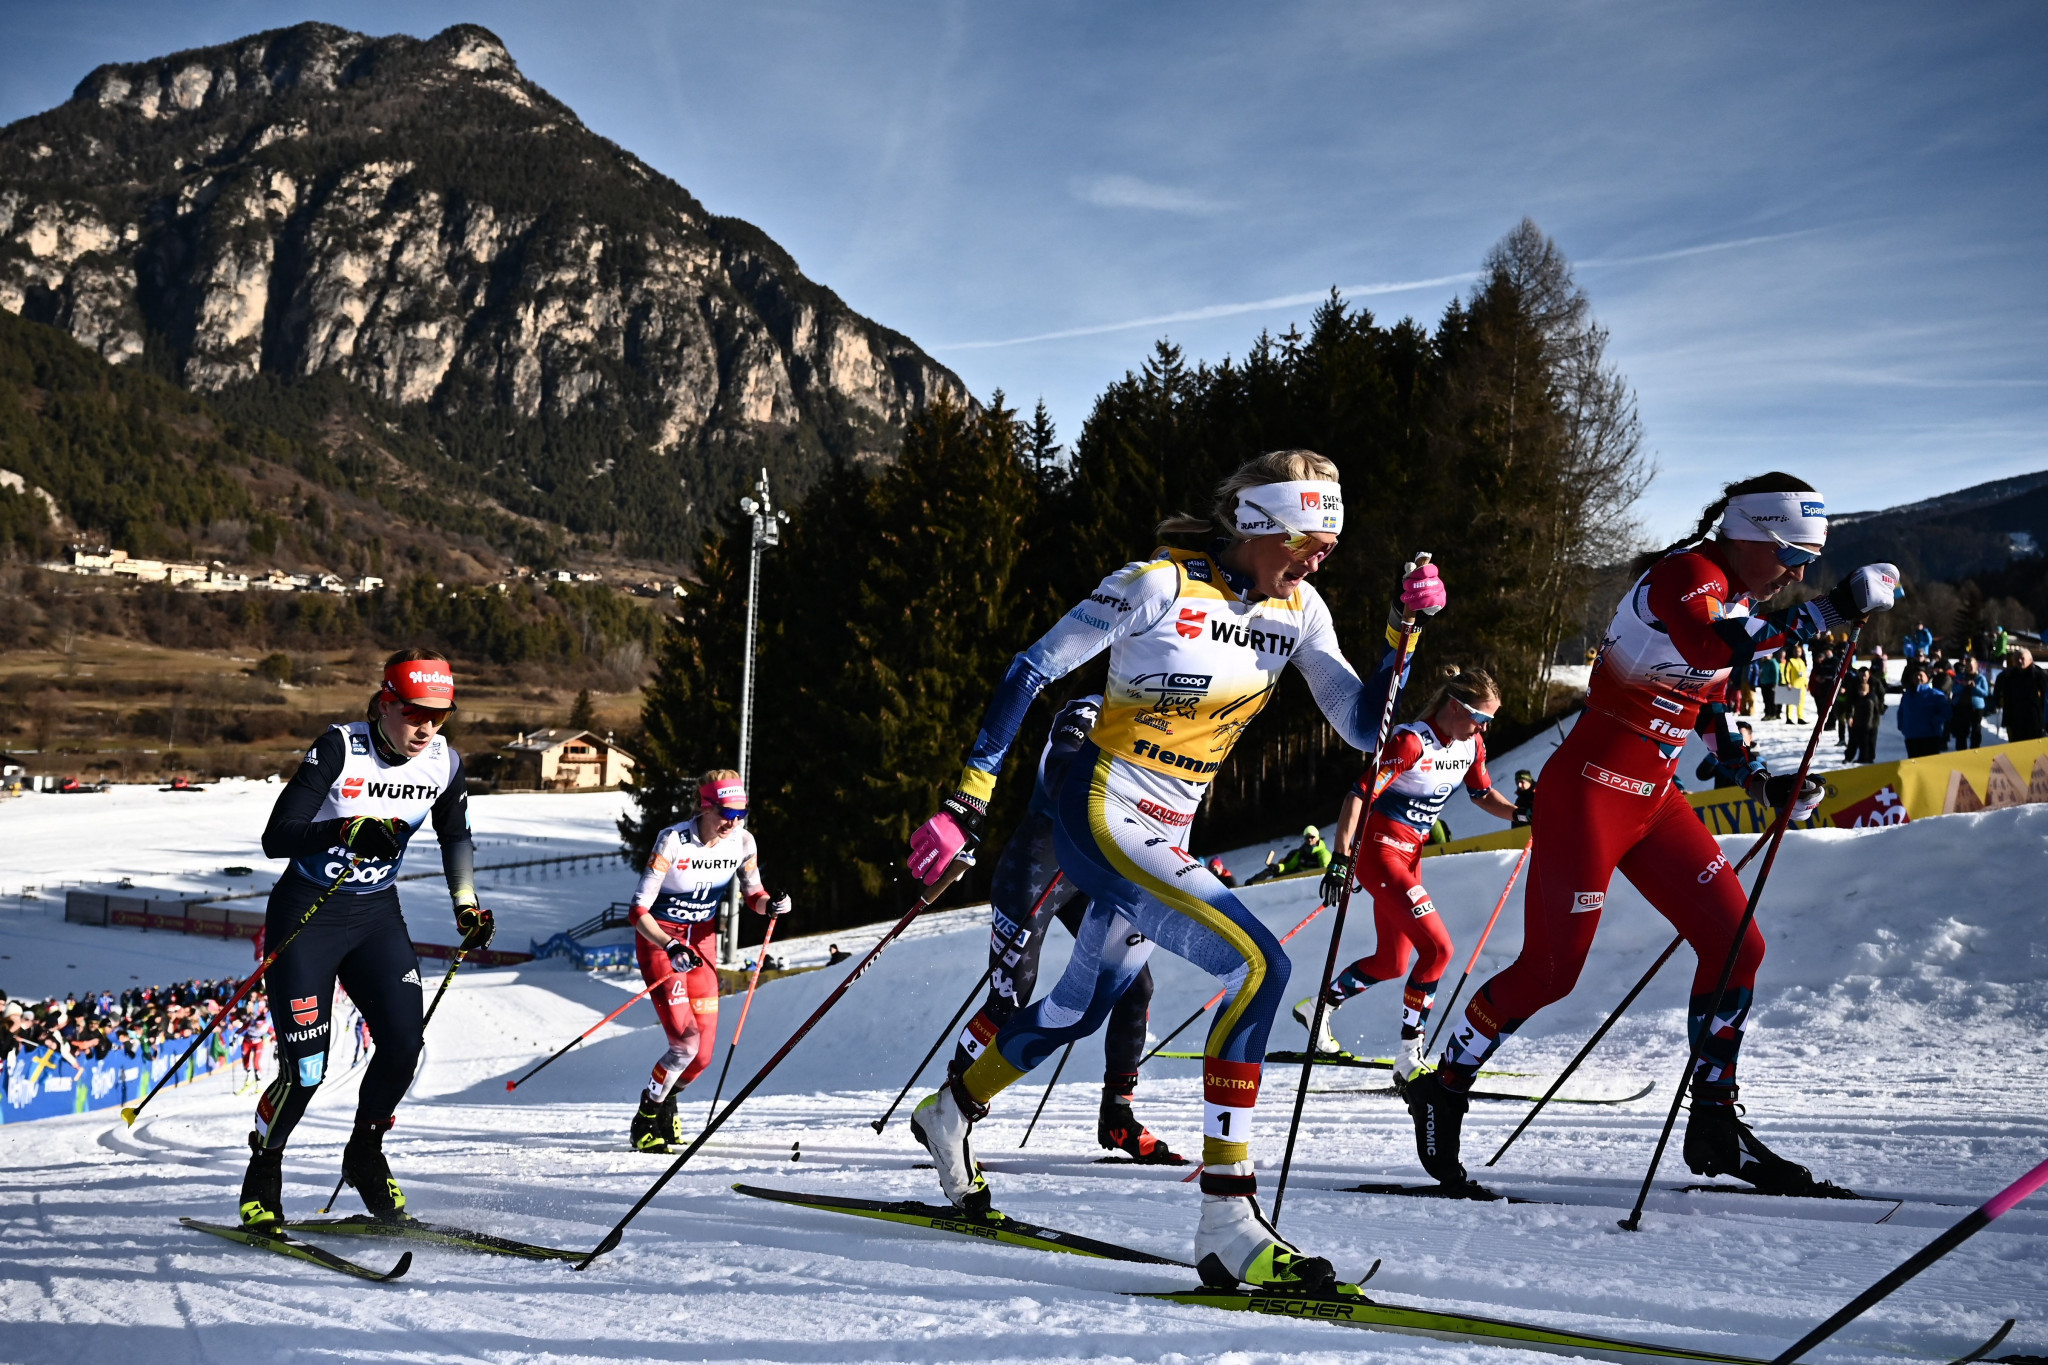 Val di Fiemme, which is set to stage the cross-country skiing competition, is among the locations that the experts are due to visit ©Getty Images